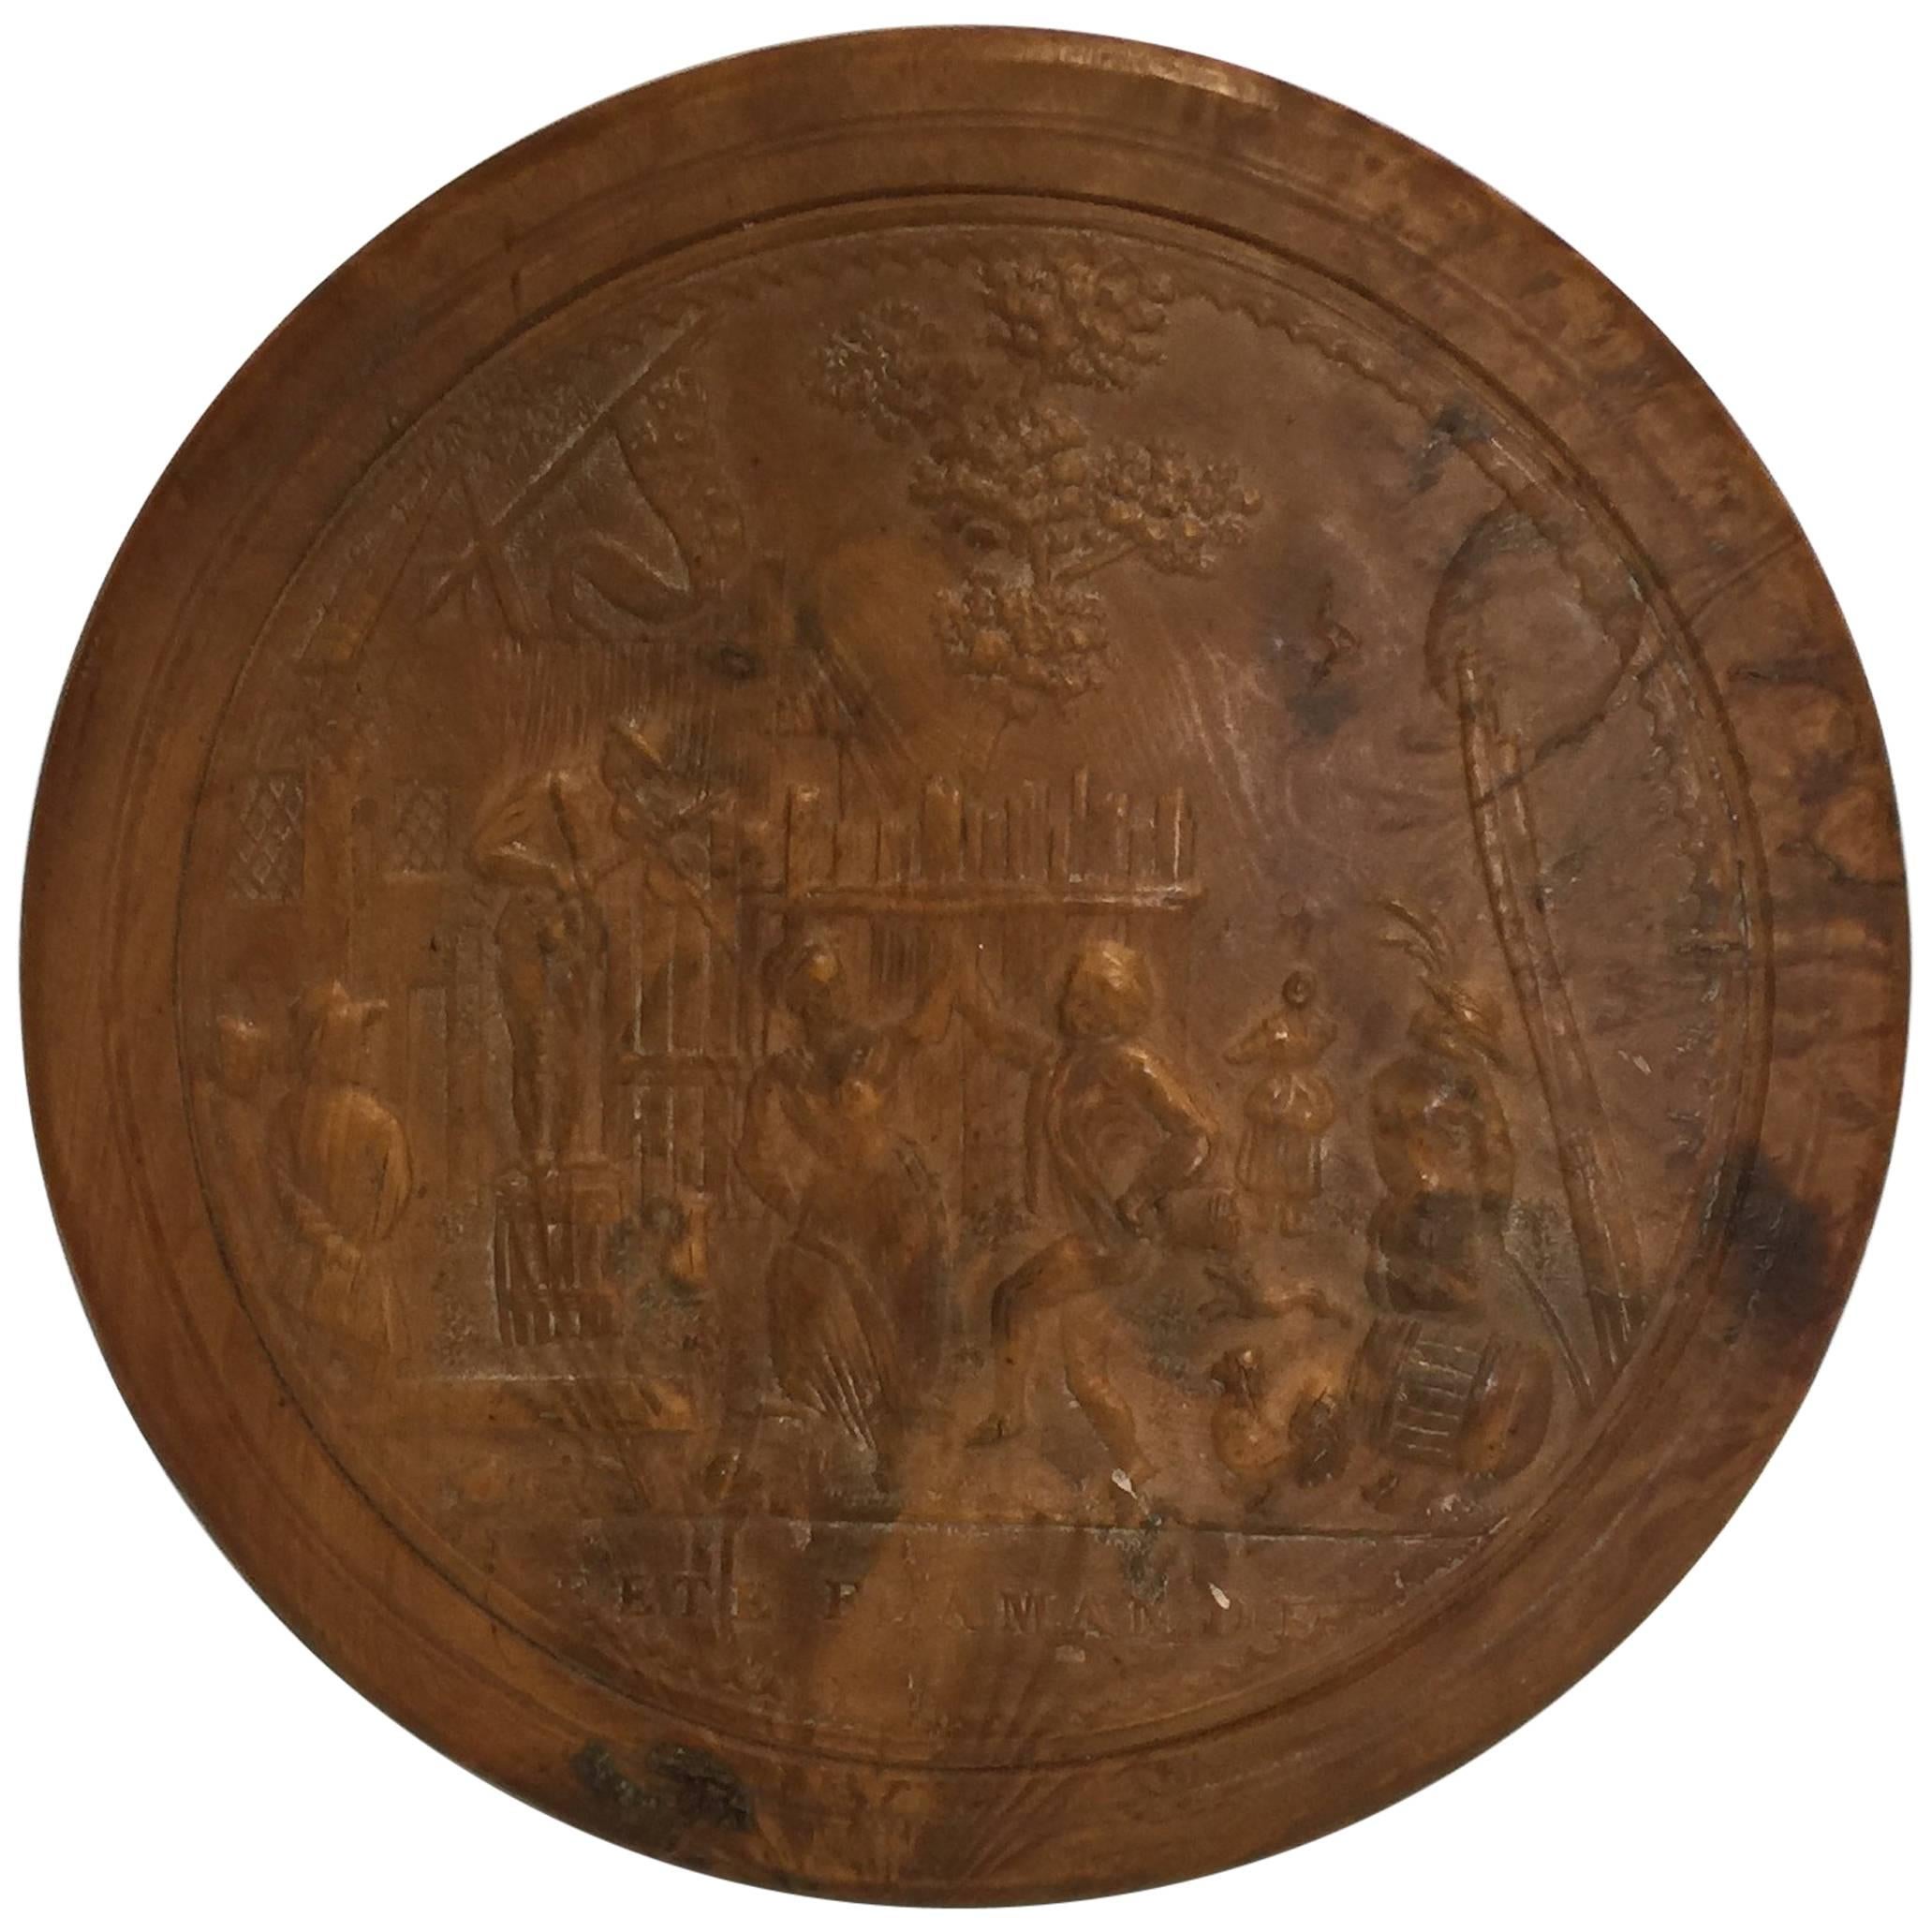 Pressed Wood Snuff Box, 19th Century "Fete Flamande" For Sale